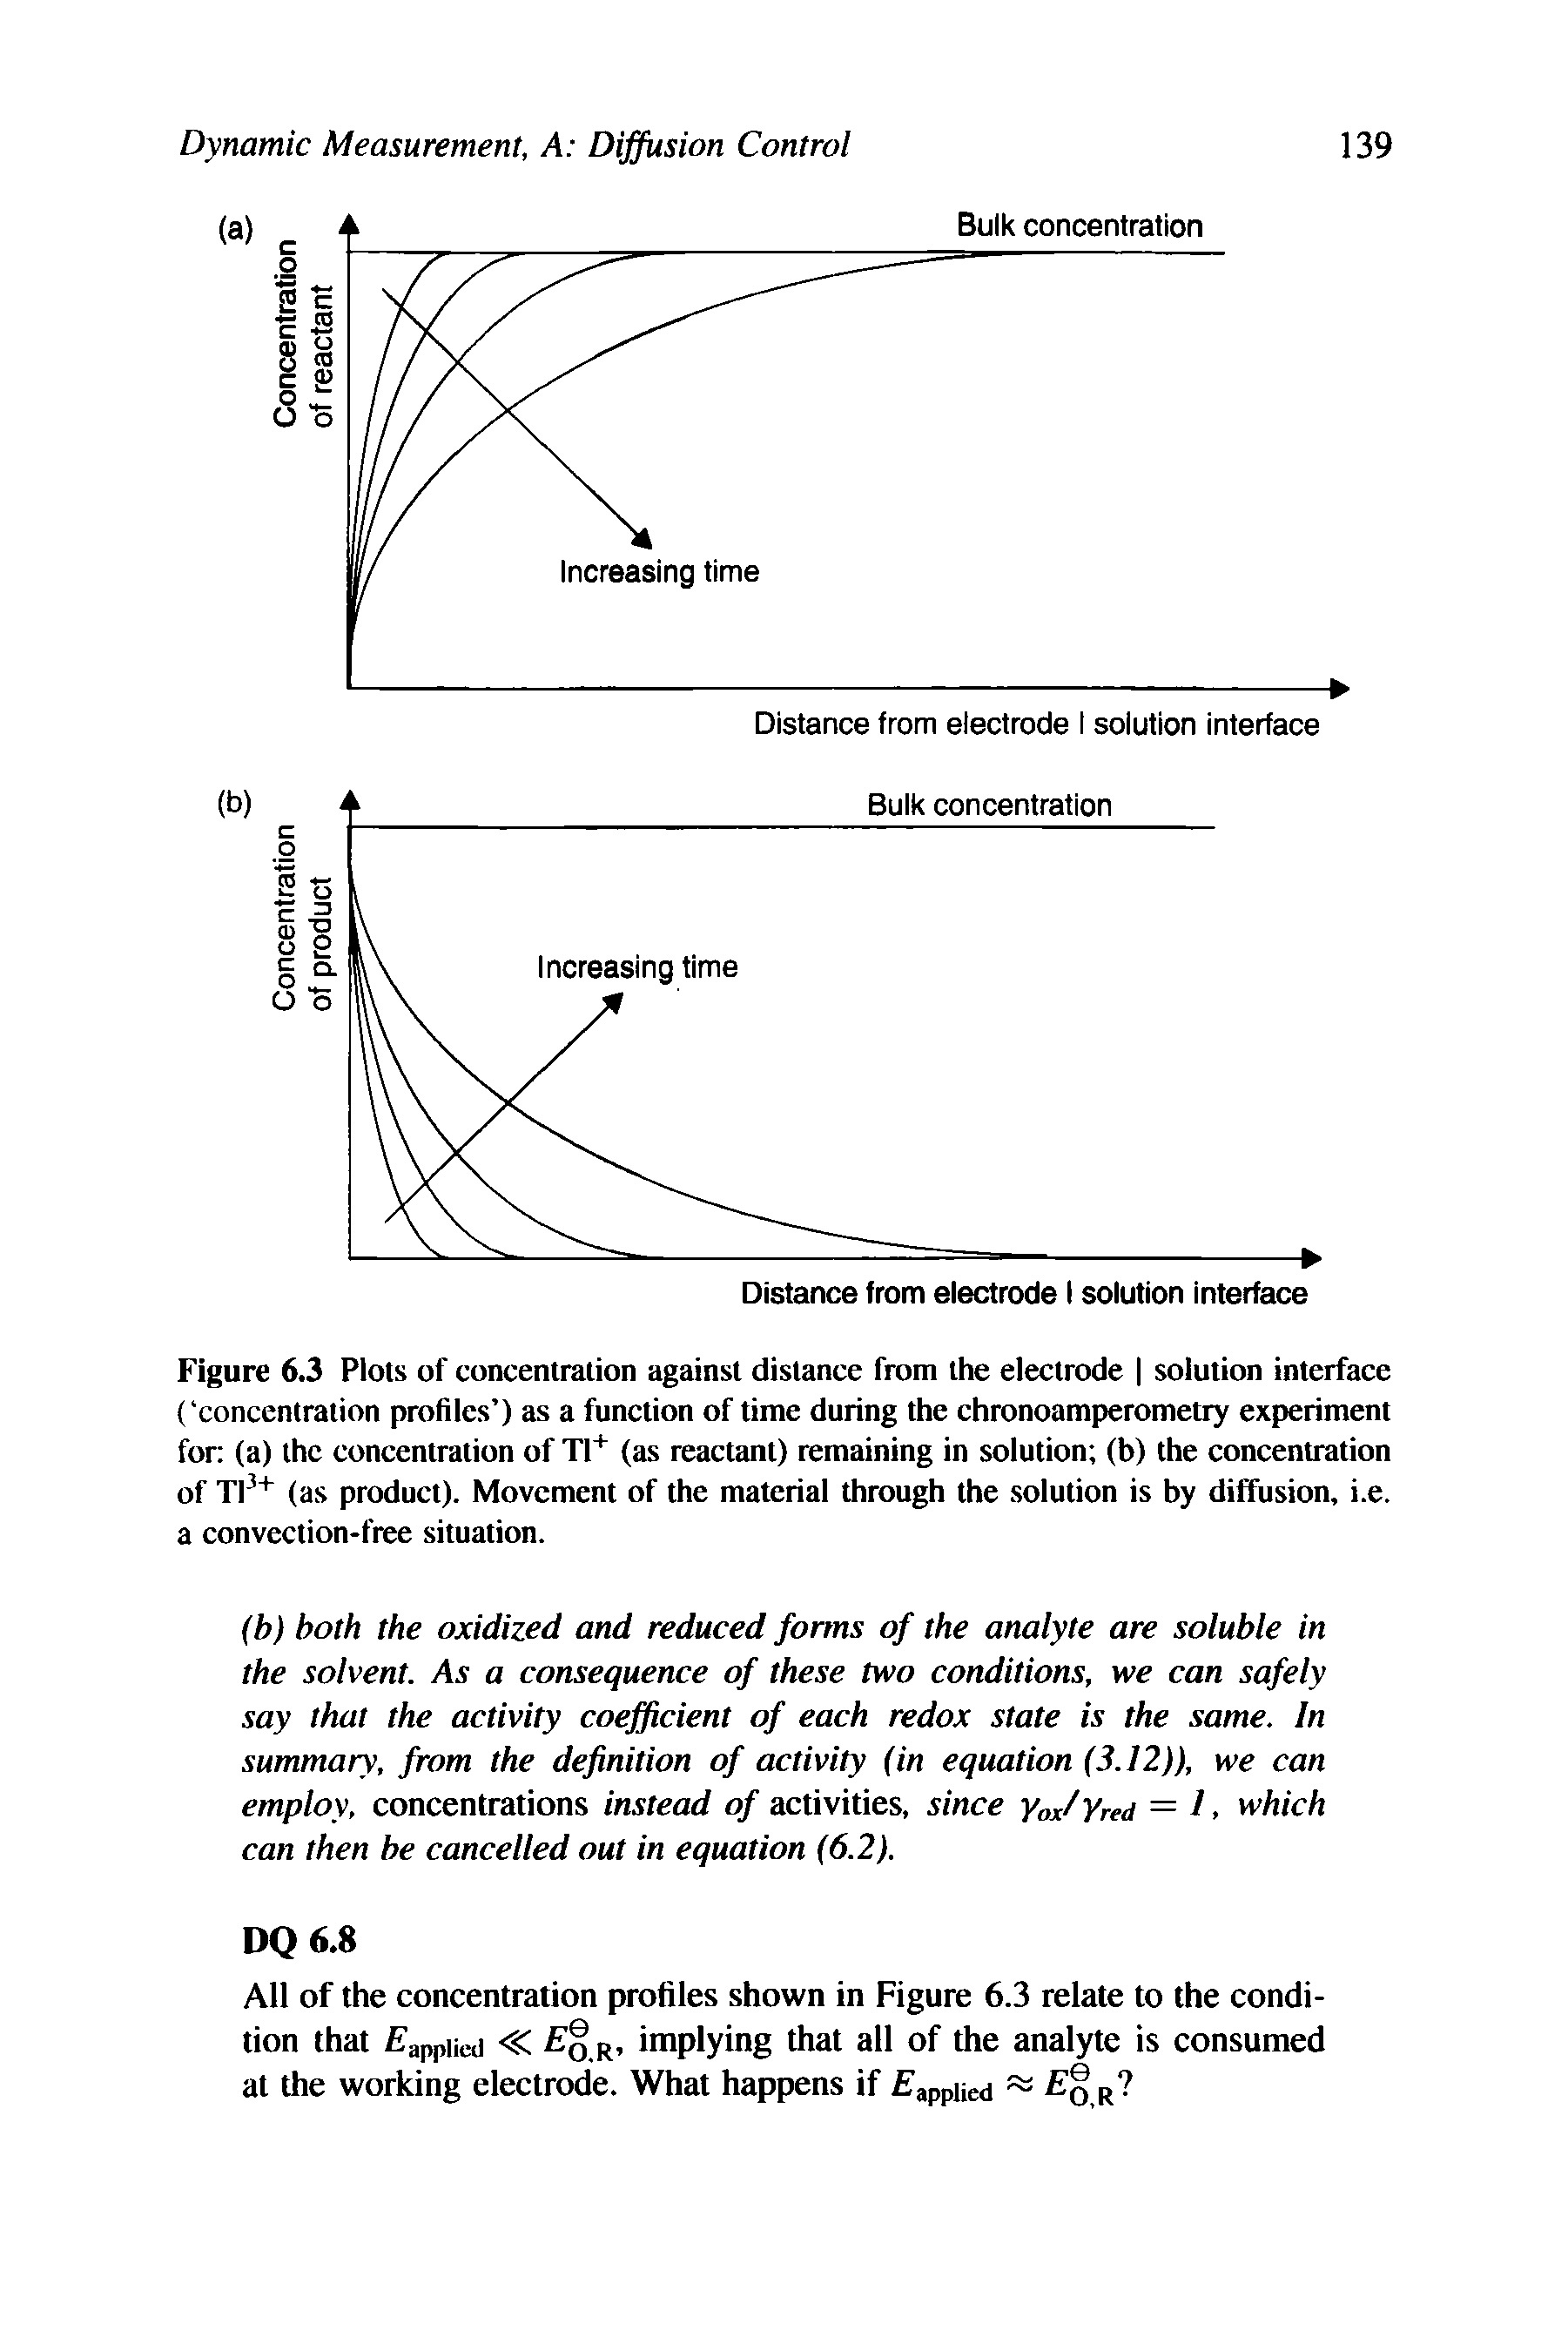 Figure 6.3 Plots of concentration against distance from the electrode solution interface ( concentration profiles ) as a function of time during the chronoamperometry experiment for (a) the concentration of Tl (as reactant) remaining in solution (b) the concentration of Tl + (as product). Movement of the material through the solution is by diffusion, i.e. a convection-free situation.